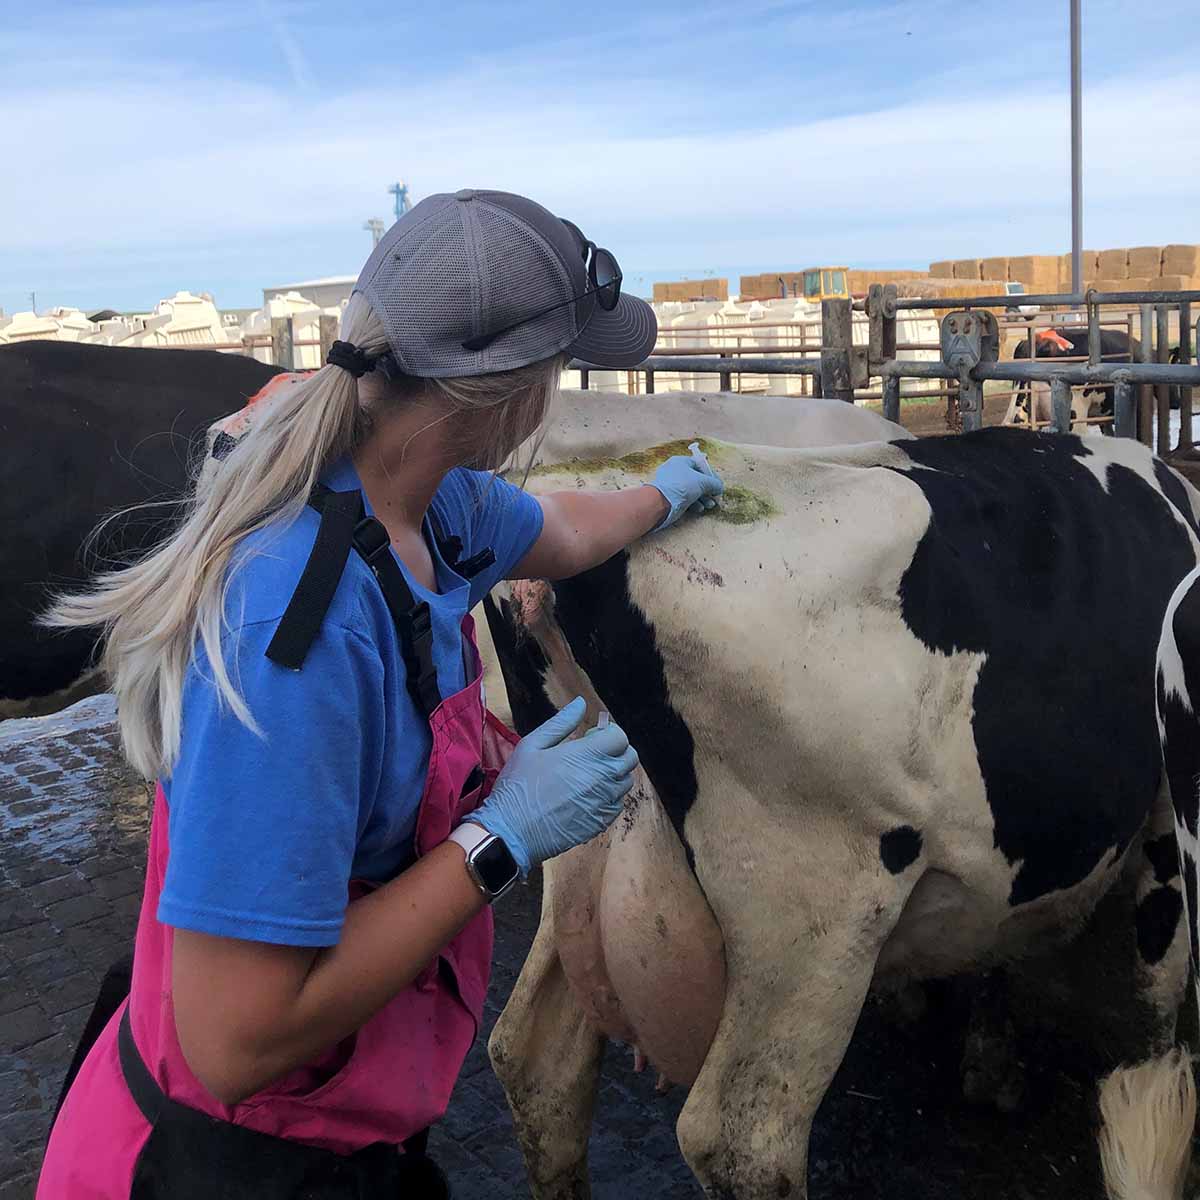 Woman giving injection to dairy cow